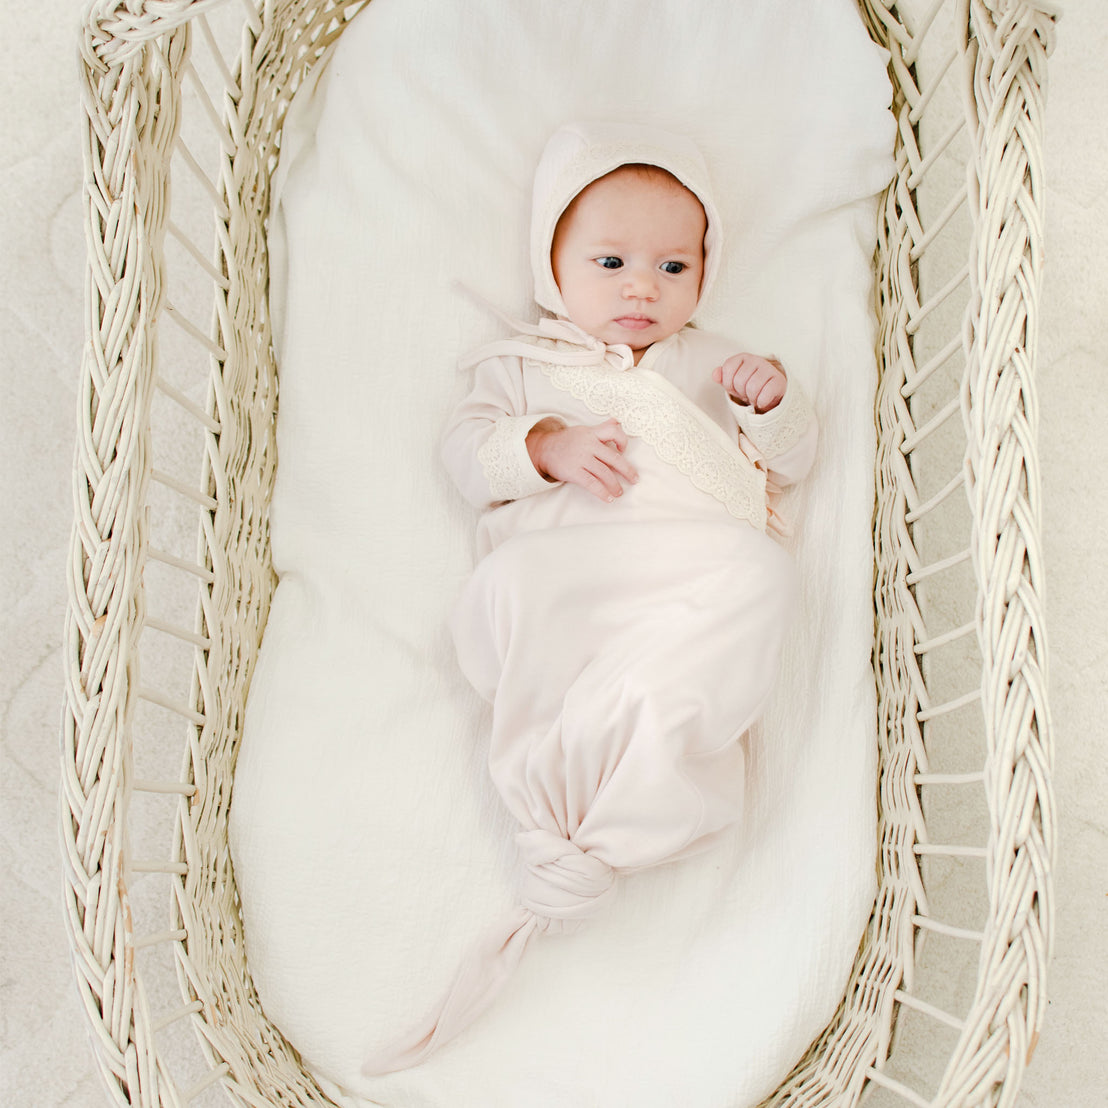 A newborn dressed in an Evelyn Knot Gown with matching Evelyn Quilt Bonnet, lying in a woven basket, looking upwards with a calm expression.